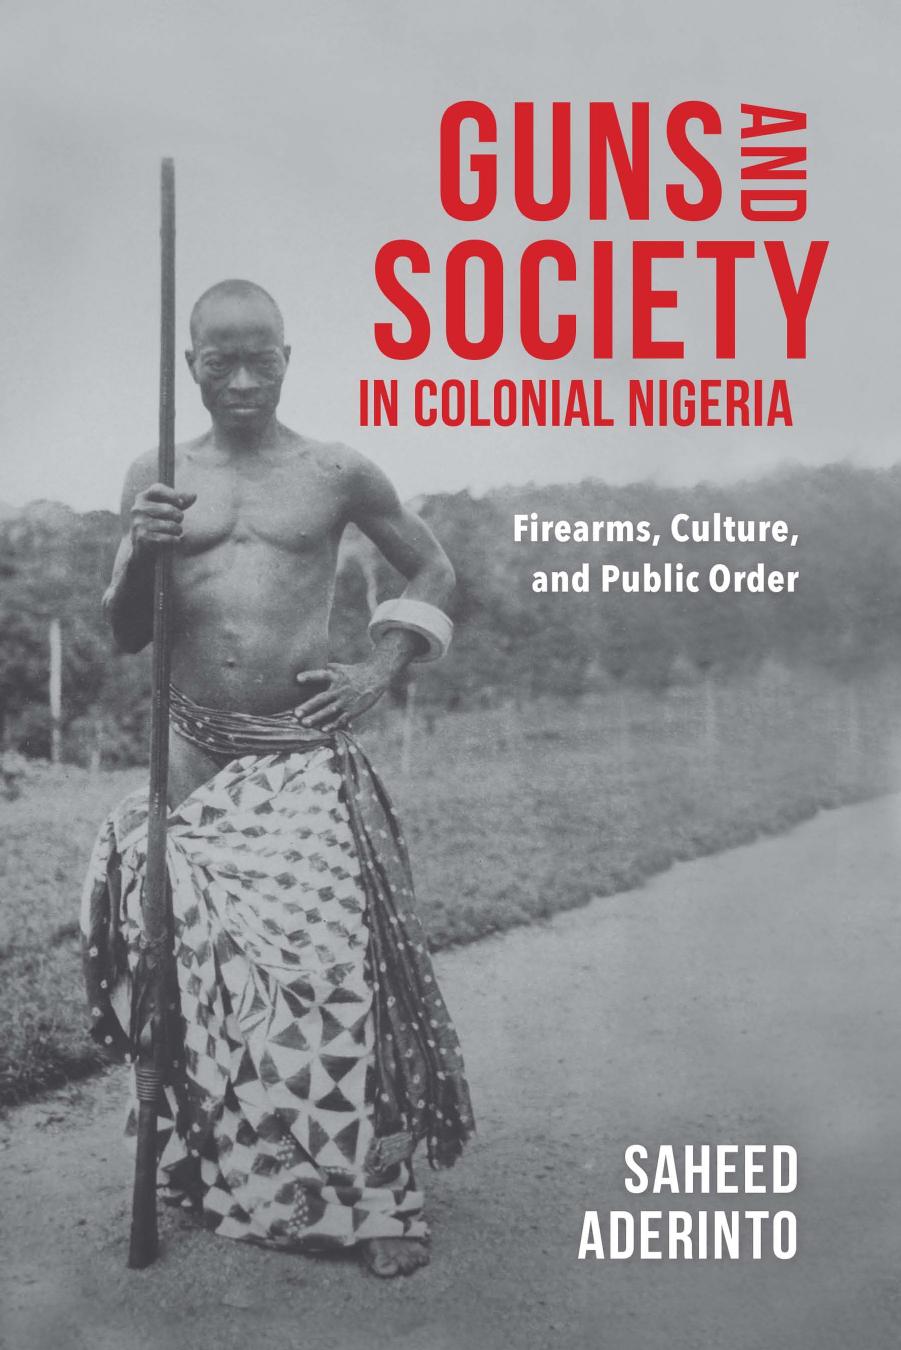 Guns and Society in Colonial Nigeria: Firearms, Culture, and Public Order by Saheed Aderinto